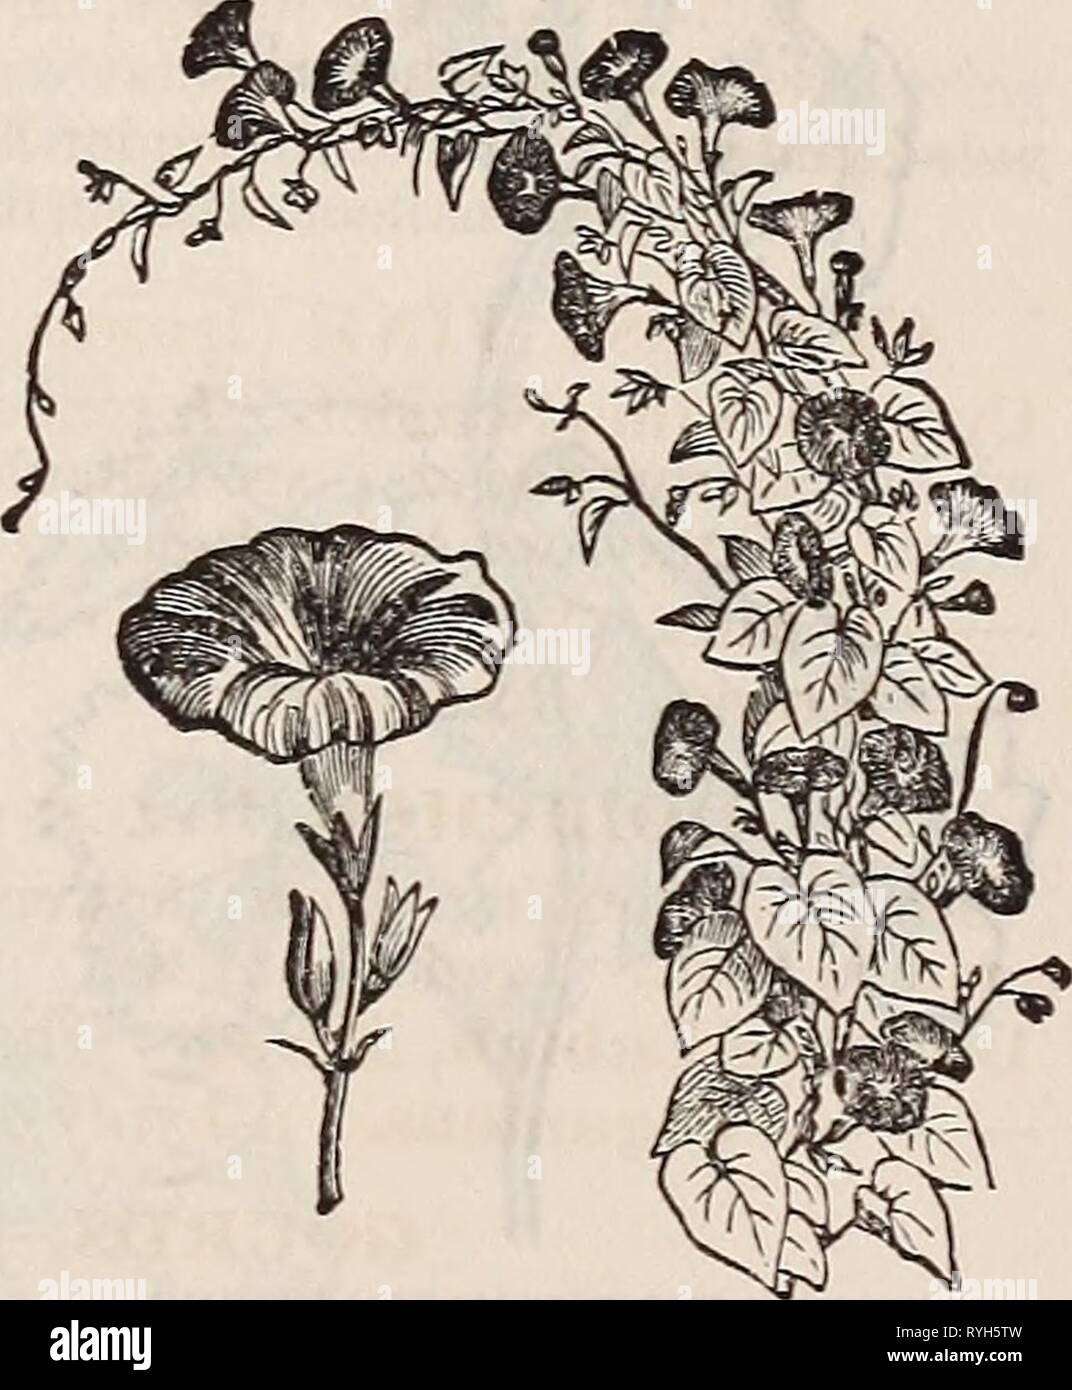 E. Fred Washburn's amateur cultivator's guide to the flower & kitchen garden for 1880  efredwashburnsam1880wash Year: 1880    THUNBERGIA AI.ATA (see page 79), IPOM^A VOIitJBILIS (aiADAME AlfNE). NEW IPOM/EAS, WITH SELF-COLORED FOLIAGE. 820 Ipomgea Hederacea Alba Grandiflora Intus Rosea. Handsome white flower, with dark-rose throat 821 Alba Grandiflora Intus Rosea Semi-Plena. Of the same form and color as the foregoing; a serai-double one, which is seldom seen in this family 822 Atrocarminea Grandiflora Azurea Marginata. With brilliant car- mine flowers, edged with clear azure-blue NEW IPOM/EAS Stock Photo